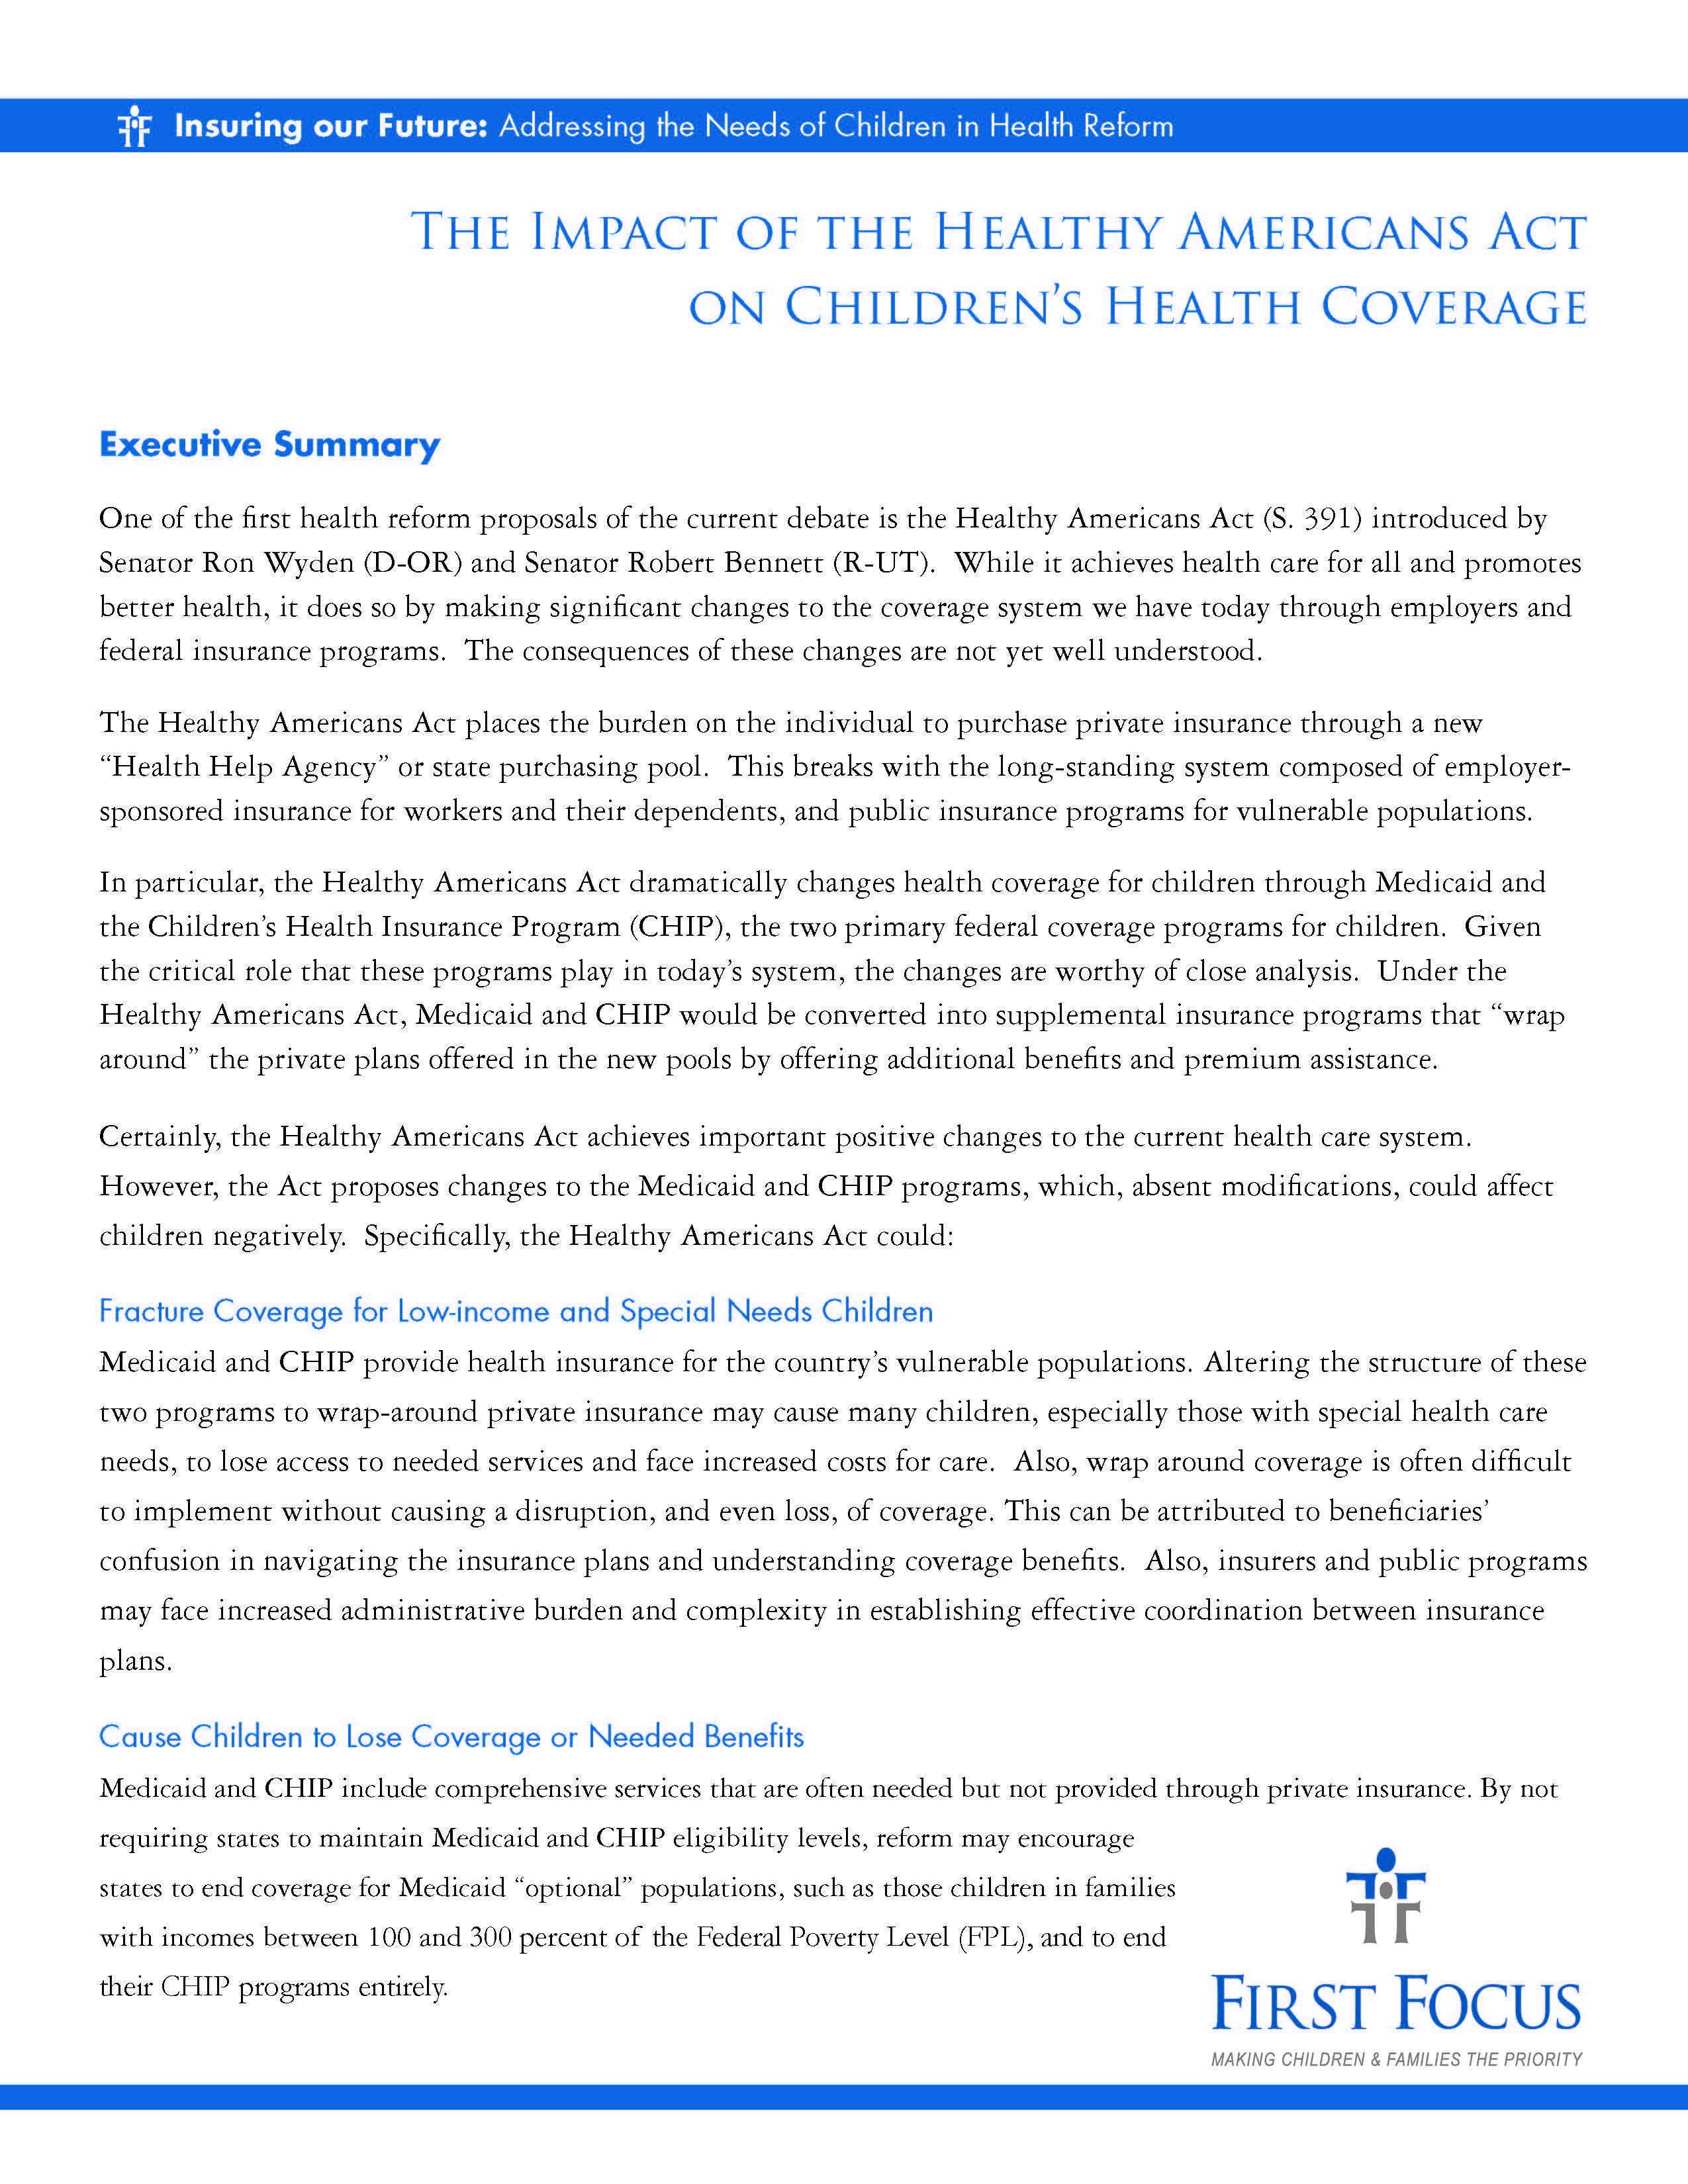 The Impact of the Healthy Americans Act on Children’s Health Coverage